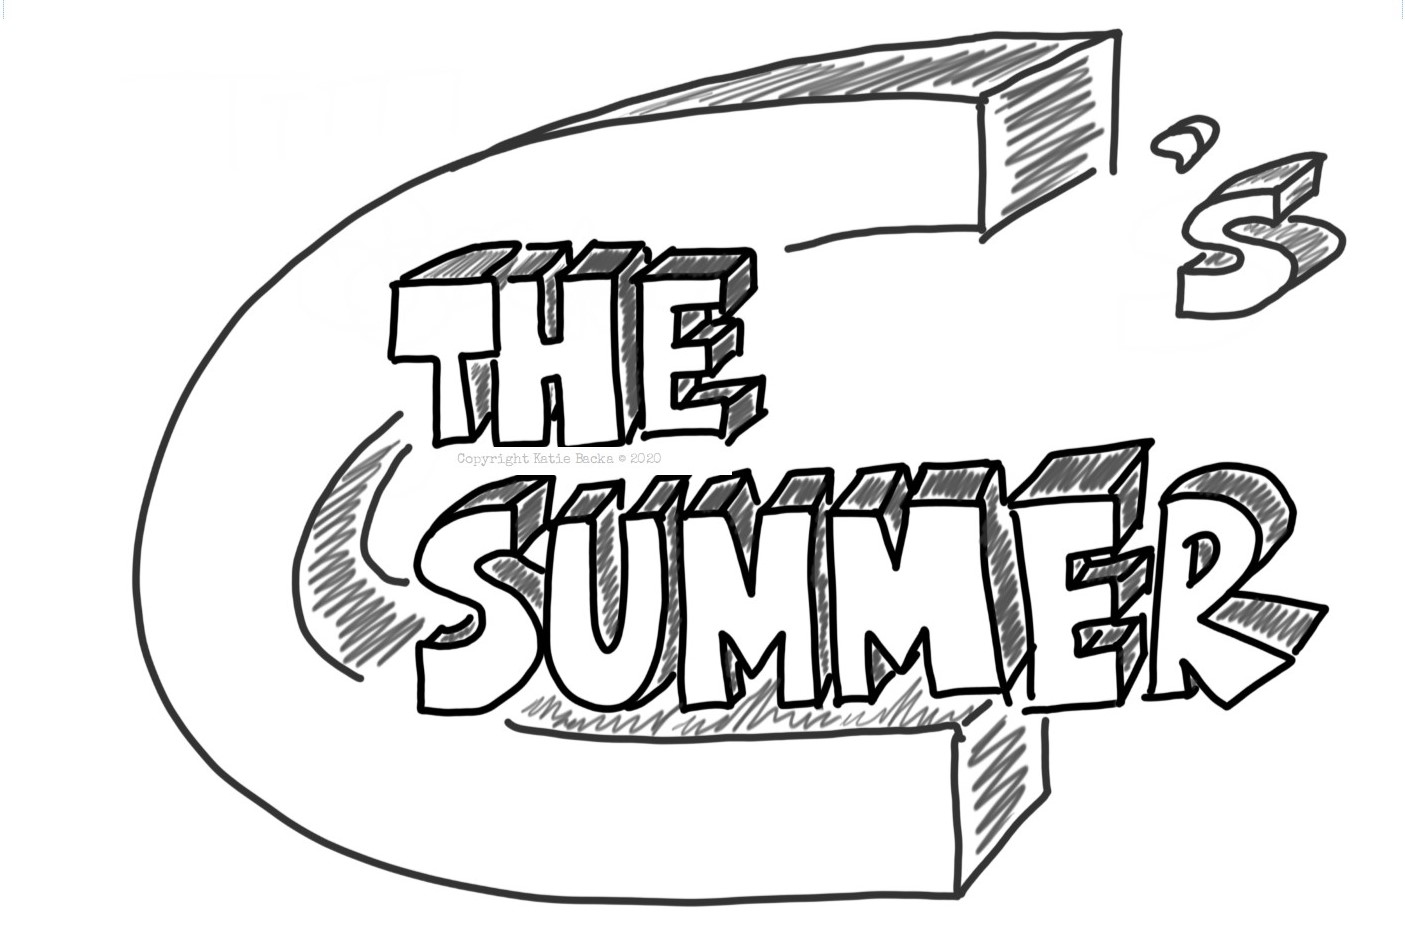 text: The Summer C's